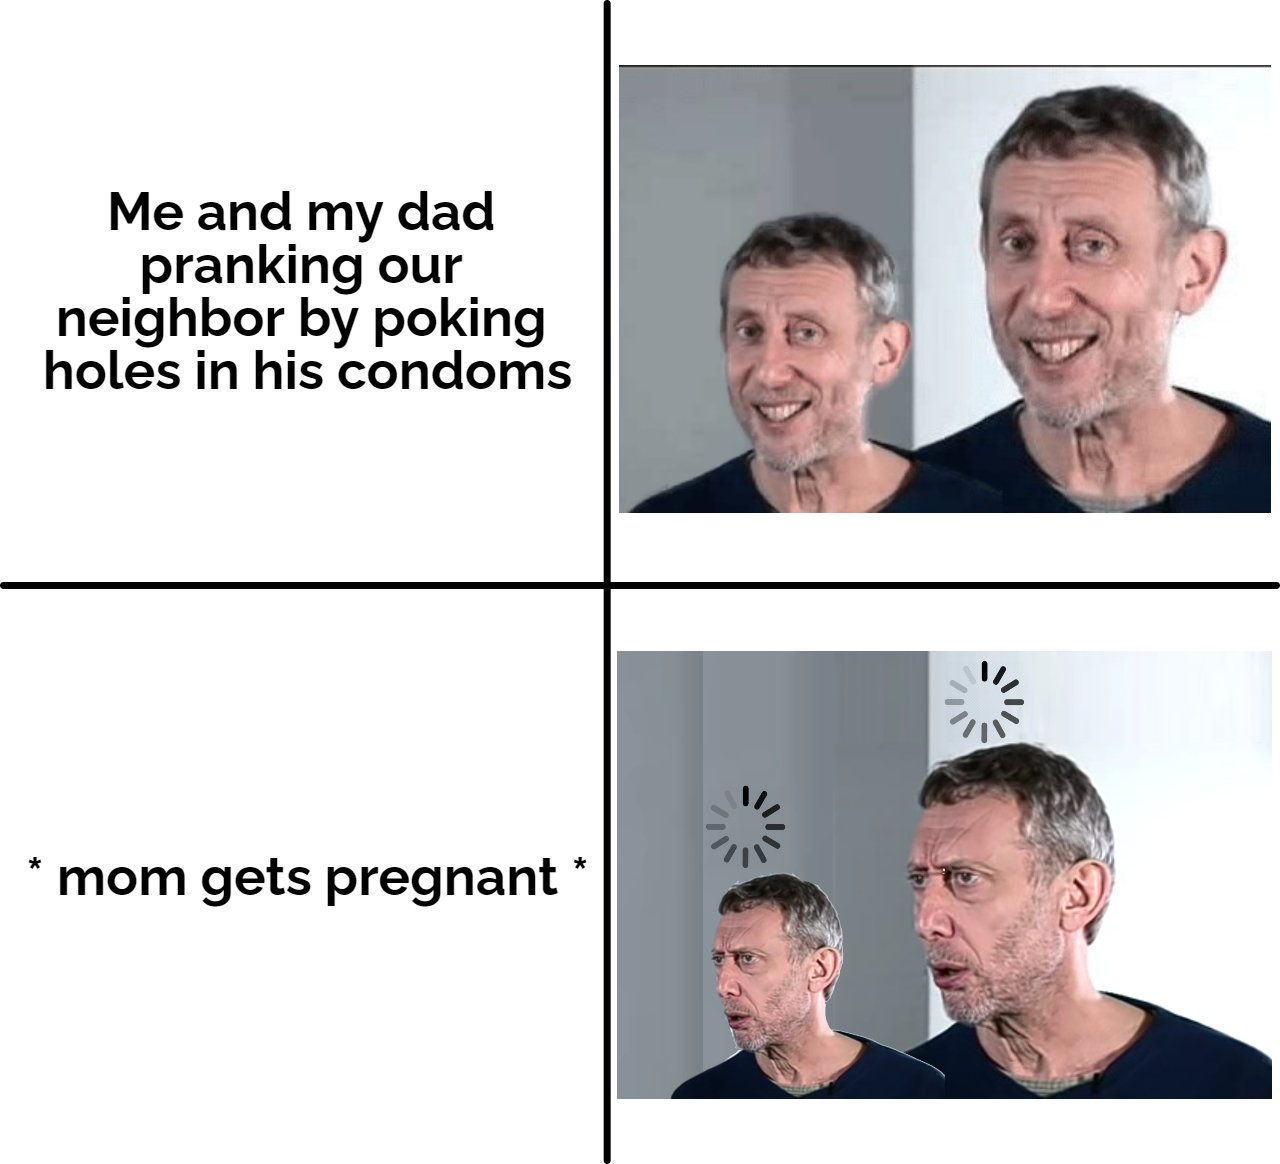 facial expression - Me and my dad pranking our neighbor by poking holes in his condoms mom gets pregnant